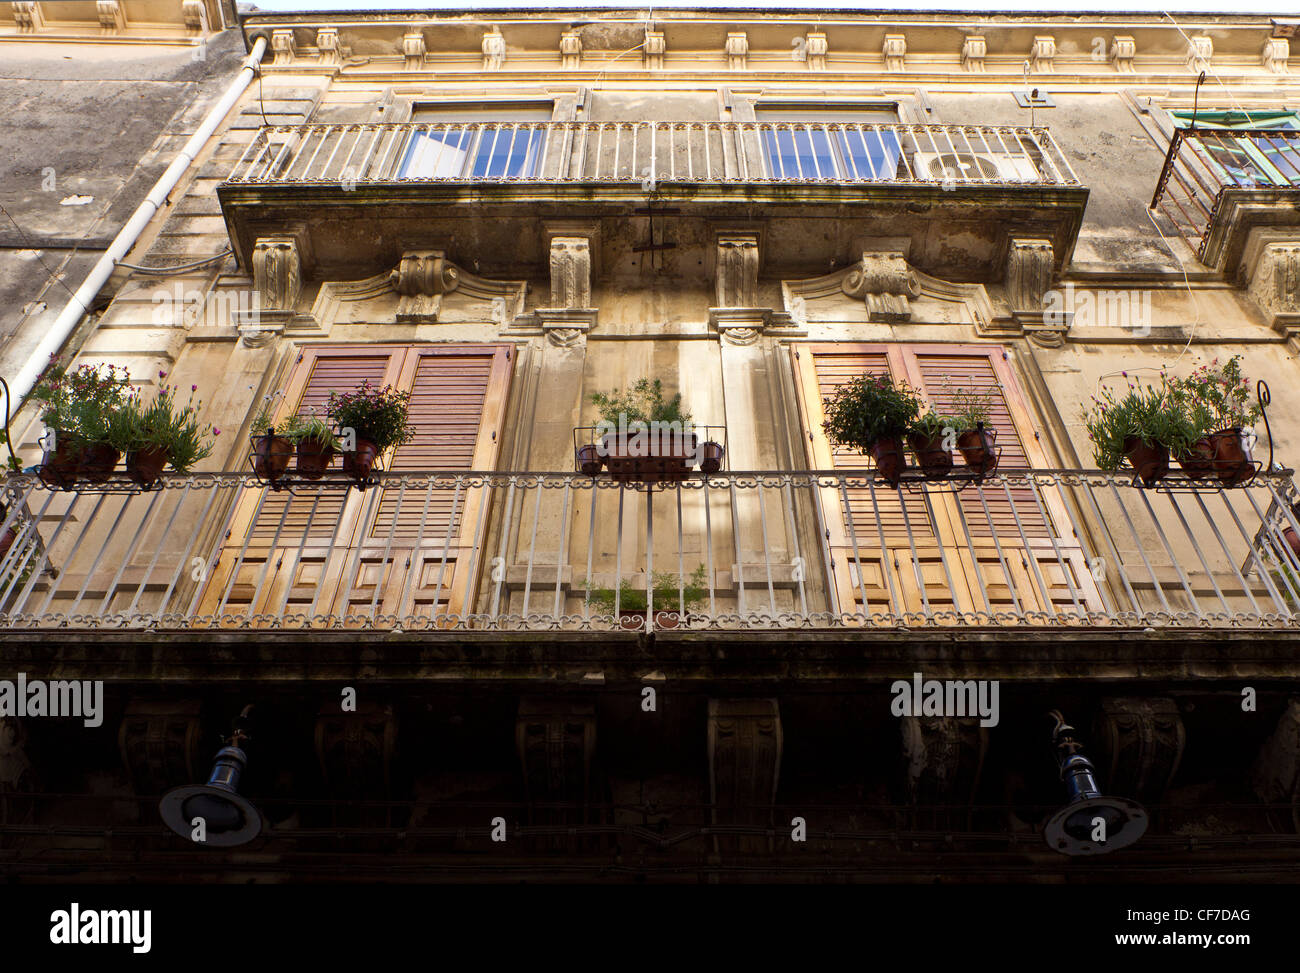 Looking upwards at the side of a building illustrating Sicilian Baroque architectural style with characteristic balconies Stock Photo